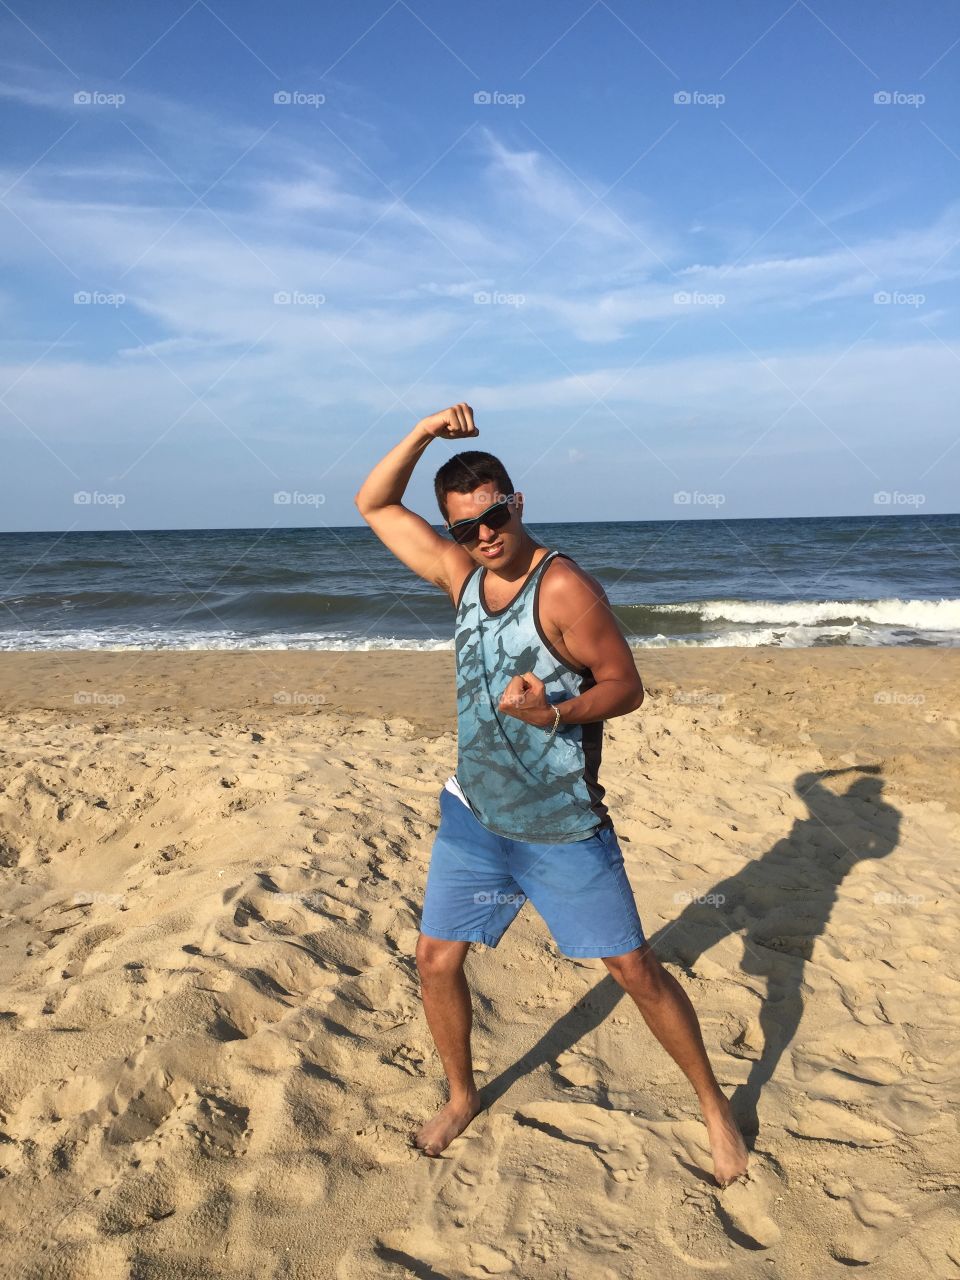 Show me your muscles. Fun at the beach 